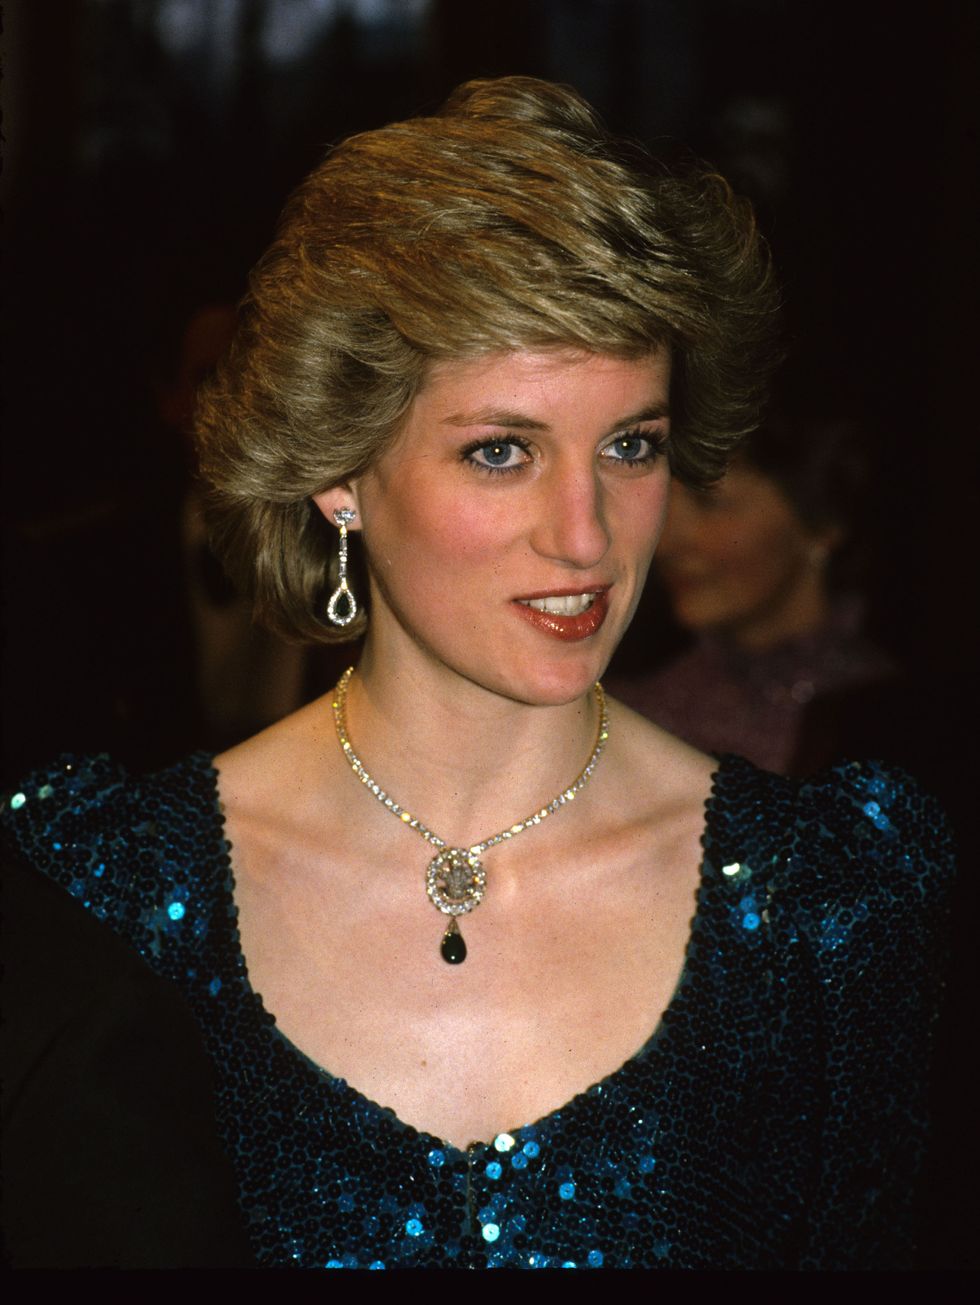 This Princess Diana Gown Is Expected to Sell for $145,000 at Auction